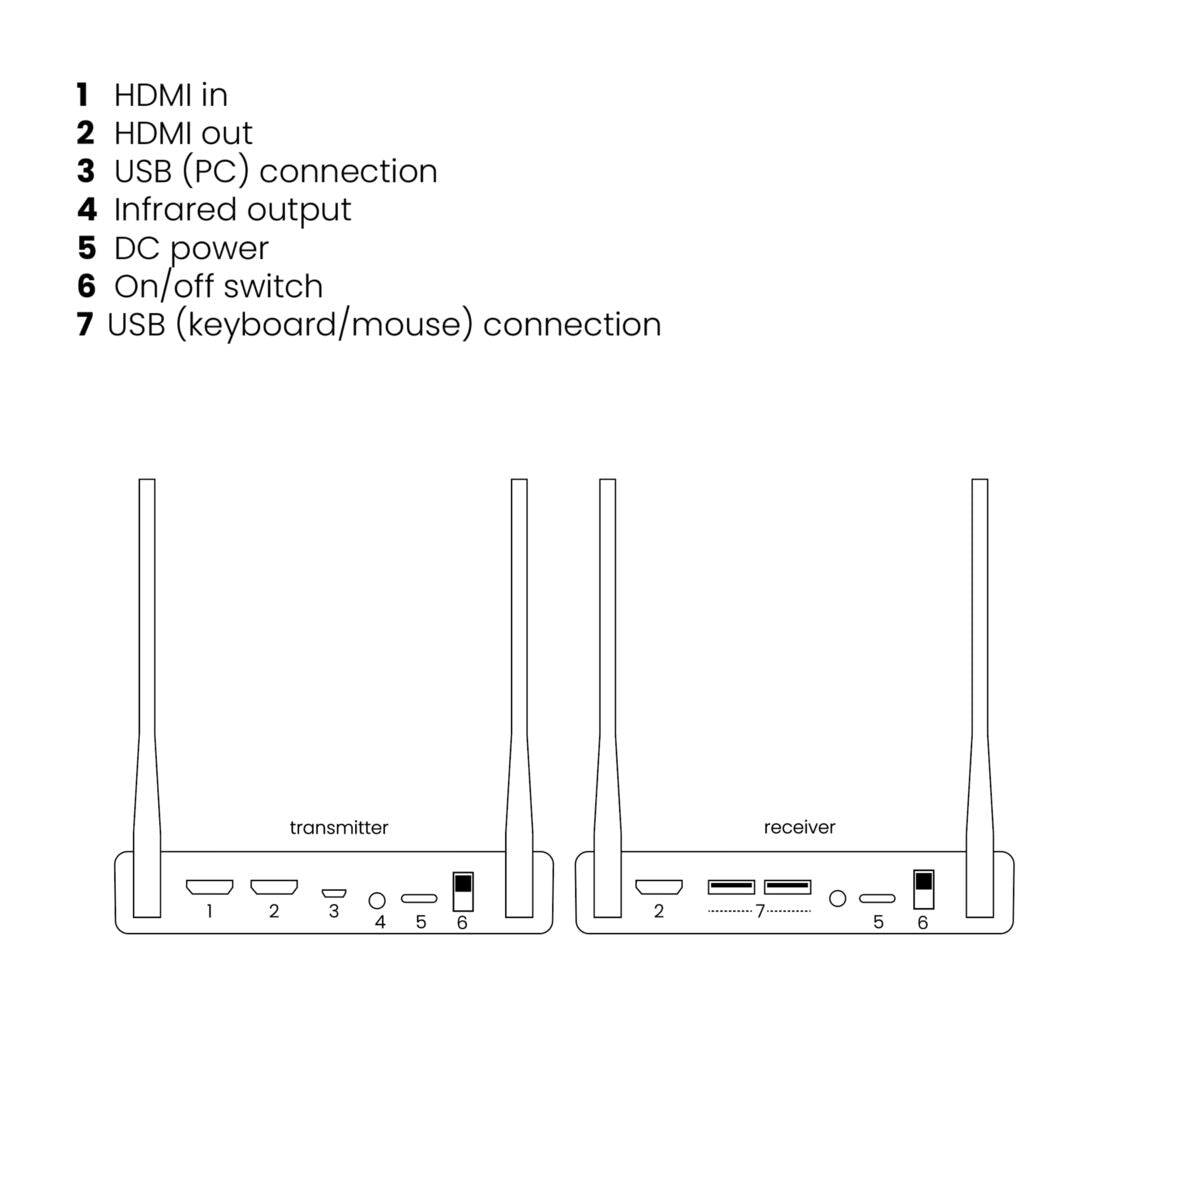 TVAW4K Pro - Wireless 4K HDMI extender - Possible to connect multiple displays